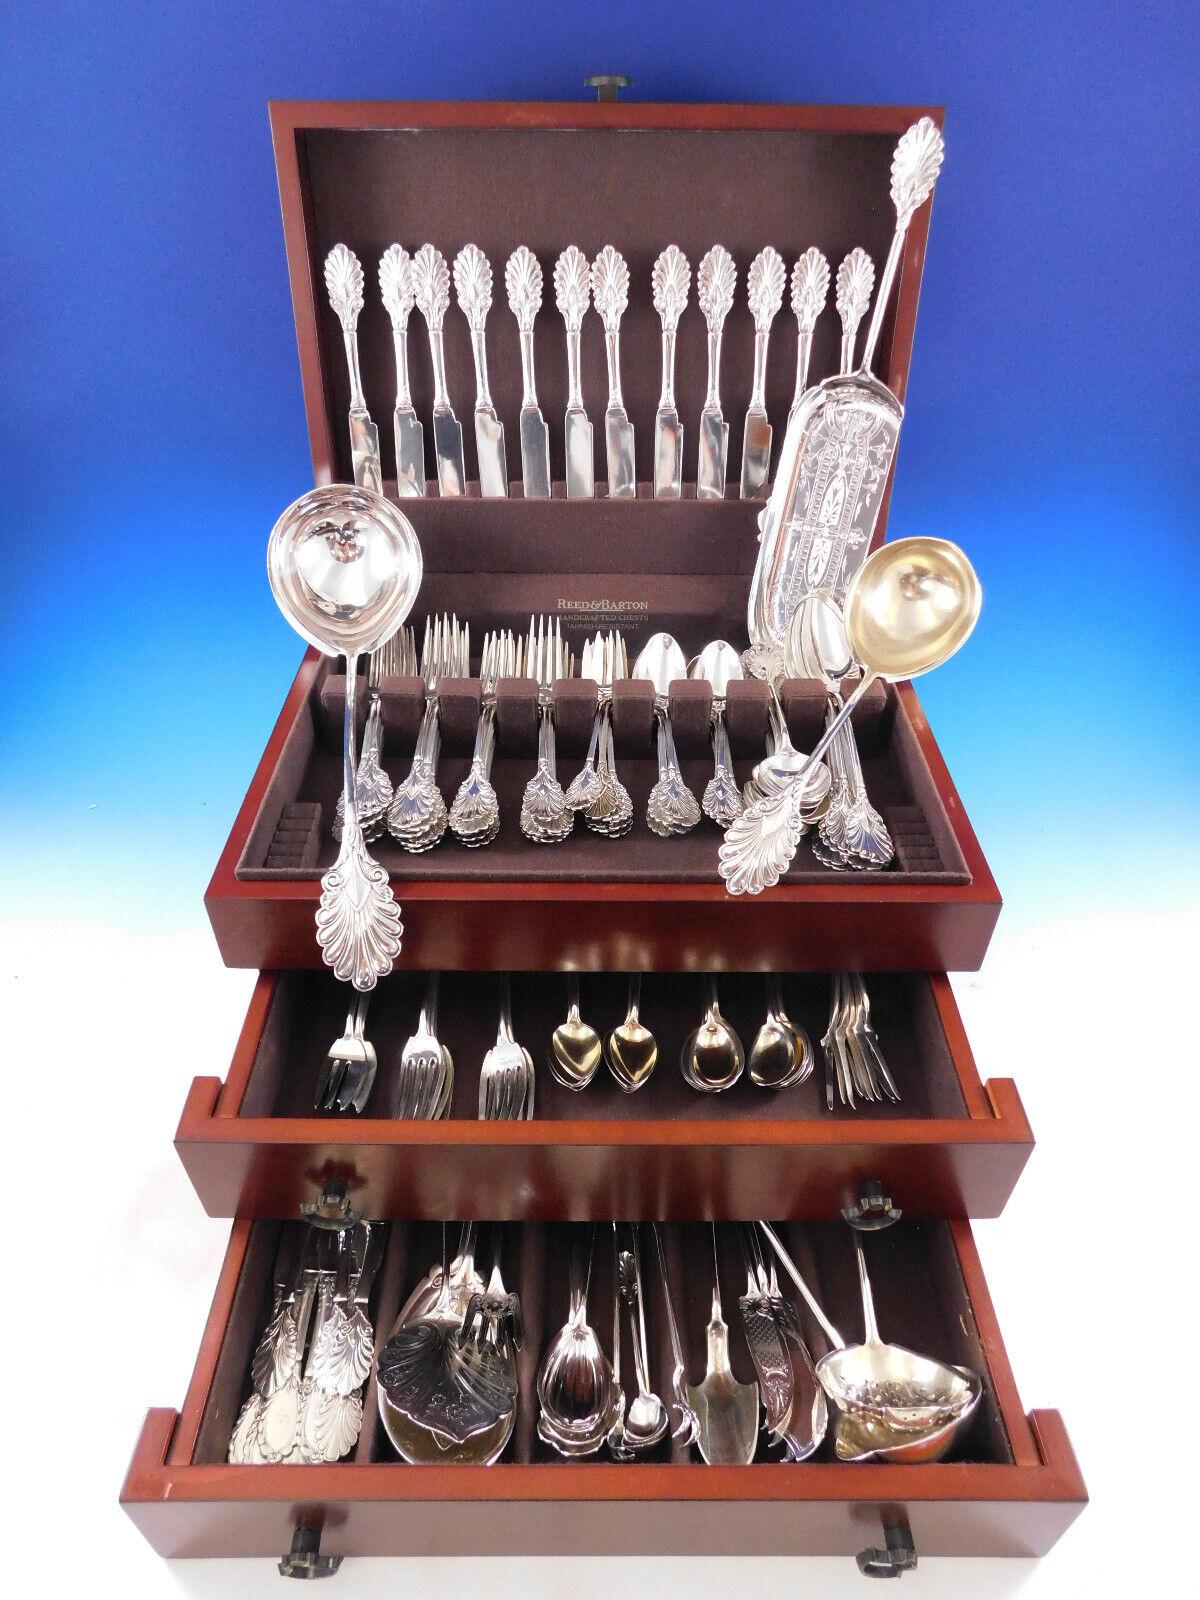 Superb Grecian by Gorham, circa 1861, sterling silver Flatware set - 149 pieces. This is an incredibly scarce early Gorham pattern and is the largest group of this pattern that we have had available in 60 years in the silver business! 

This service